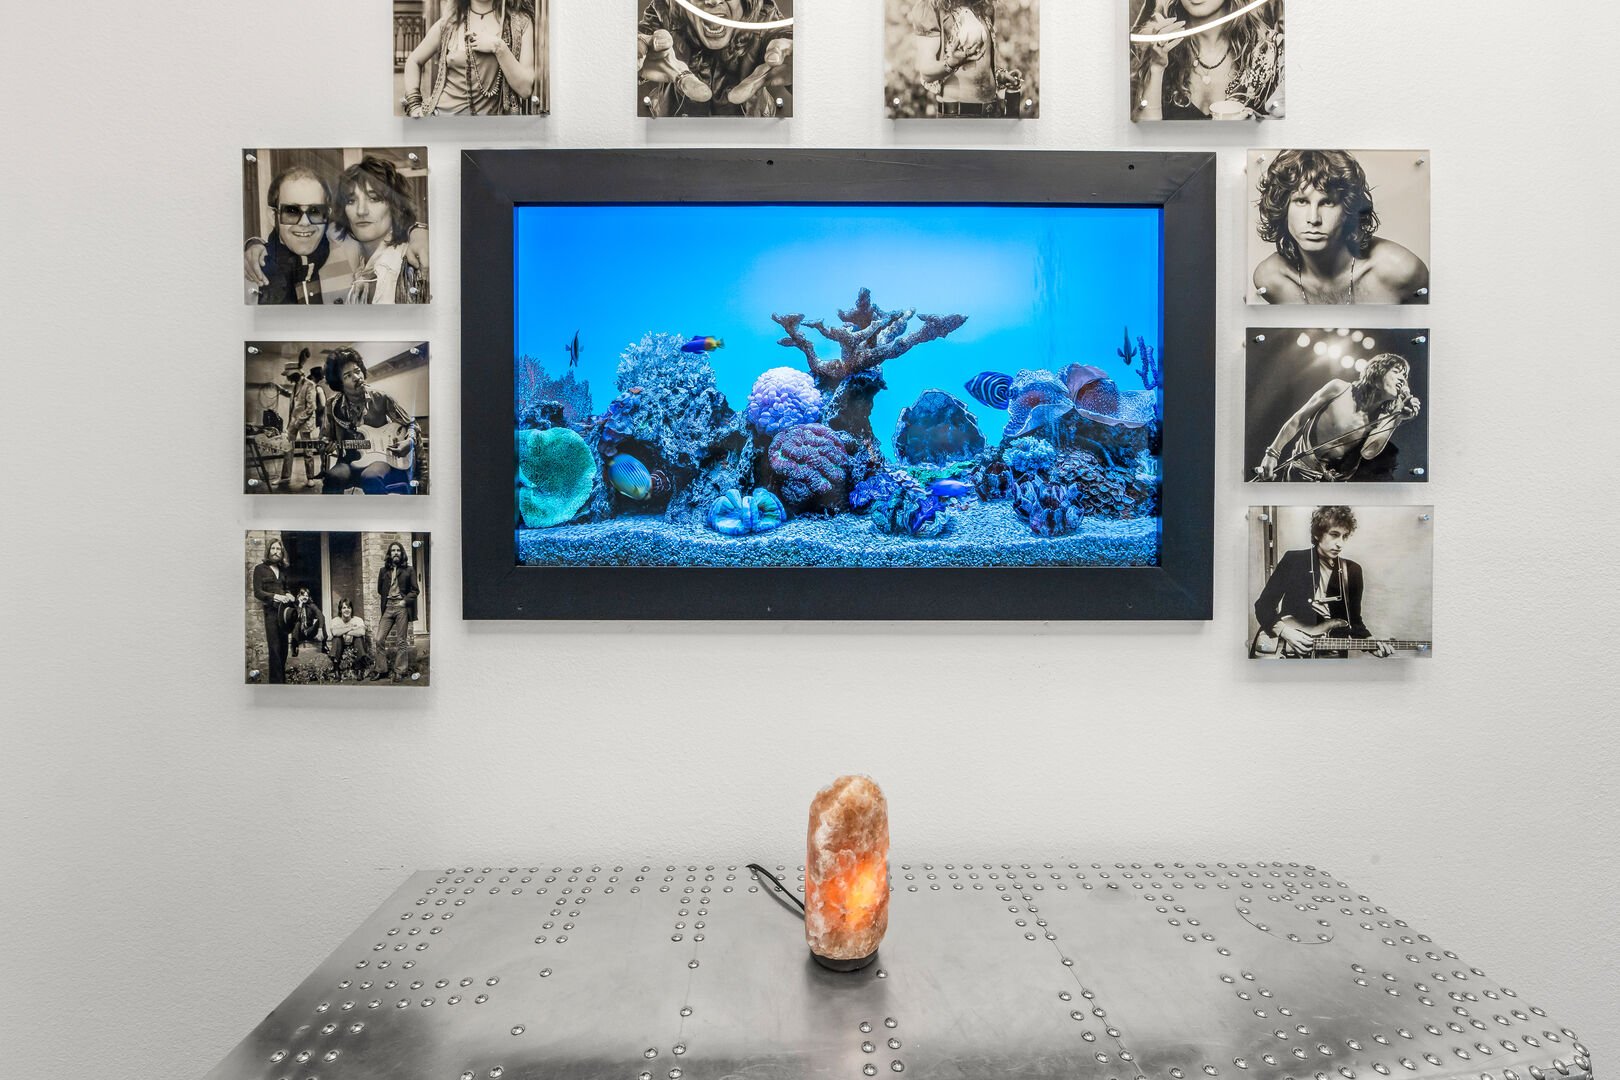 As you walk into Hard Roq, the foyer features a virtual fish tank that is sure to keep everyone entertained.